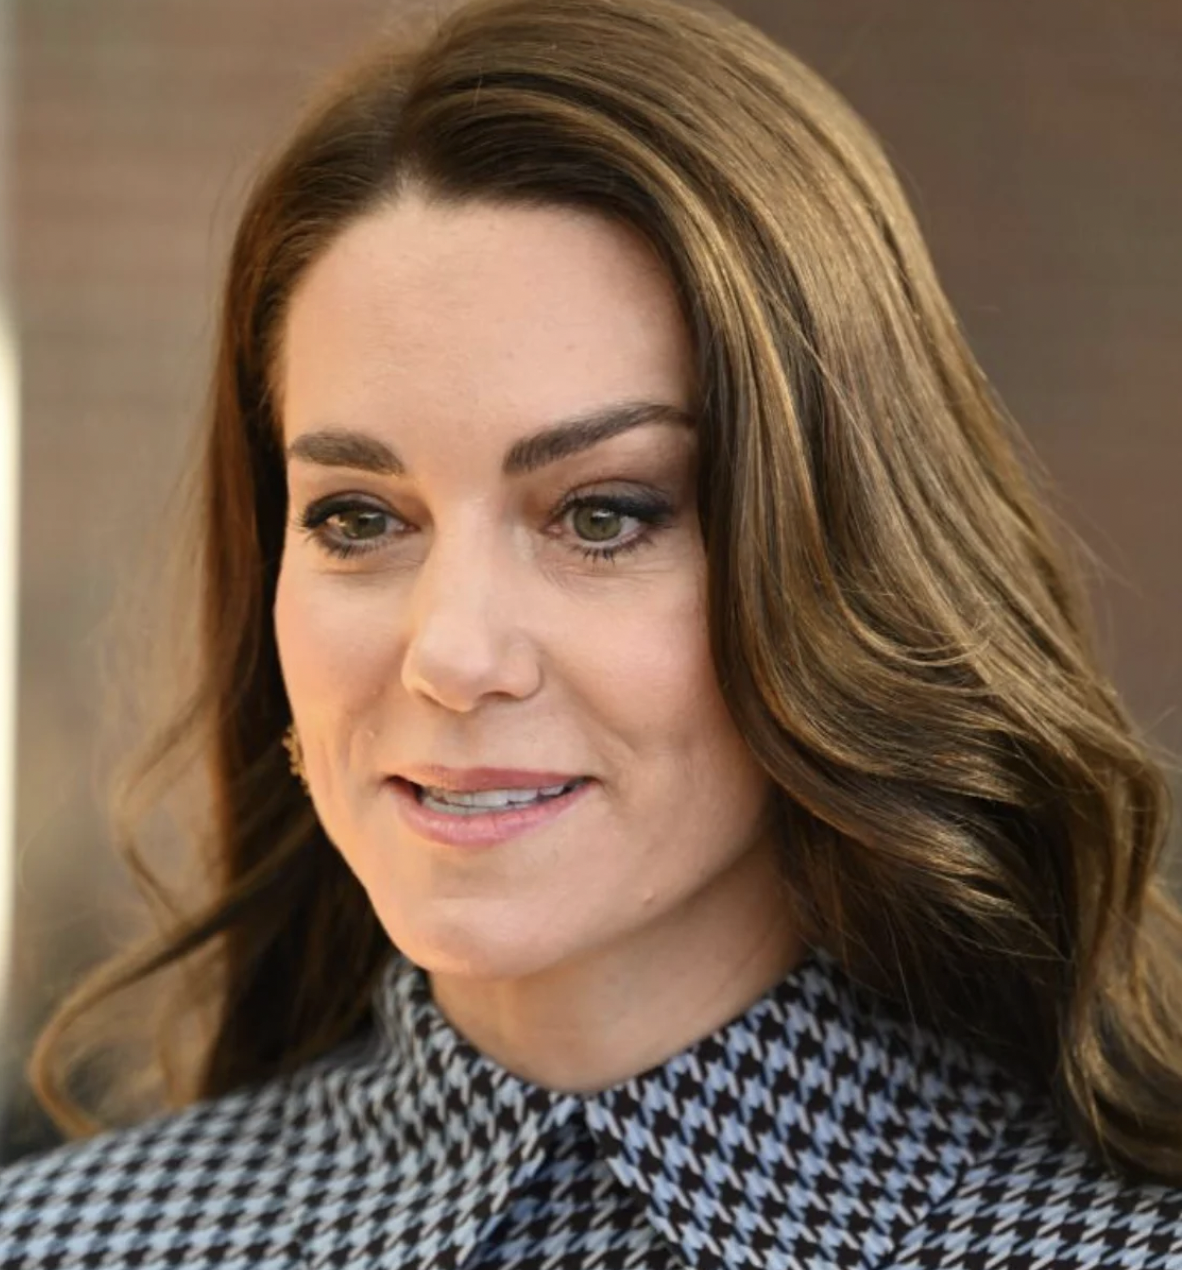 Real reason Kate Middleton was unable to call her mother after George’s birth